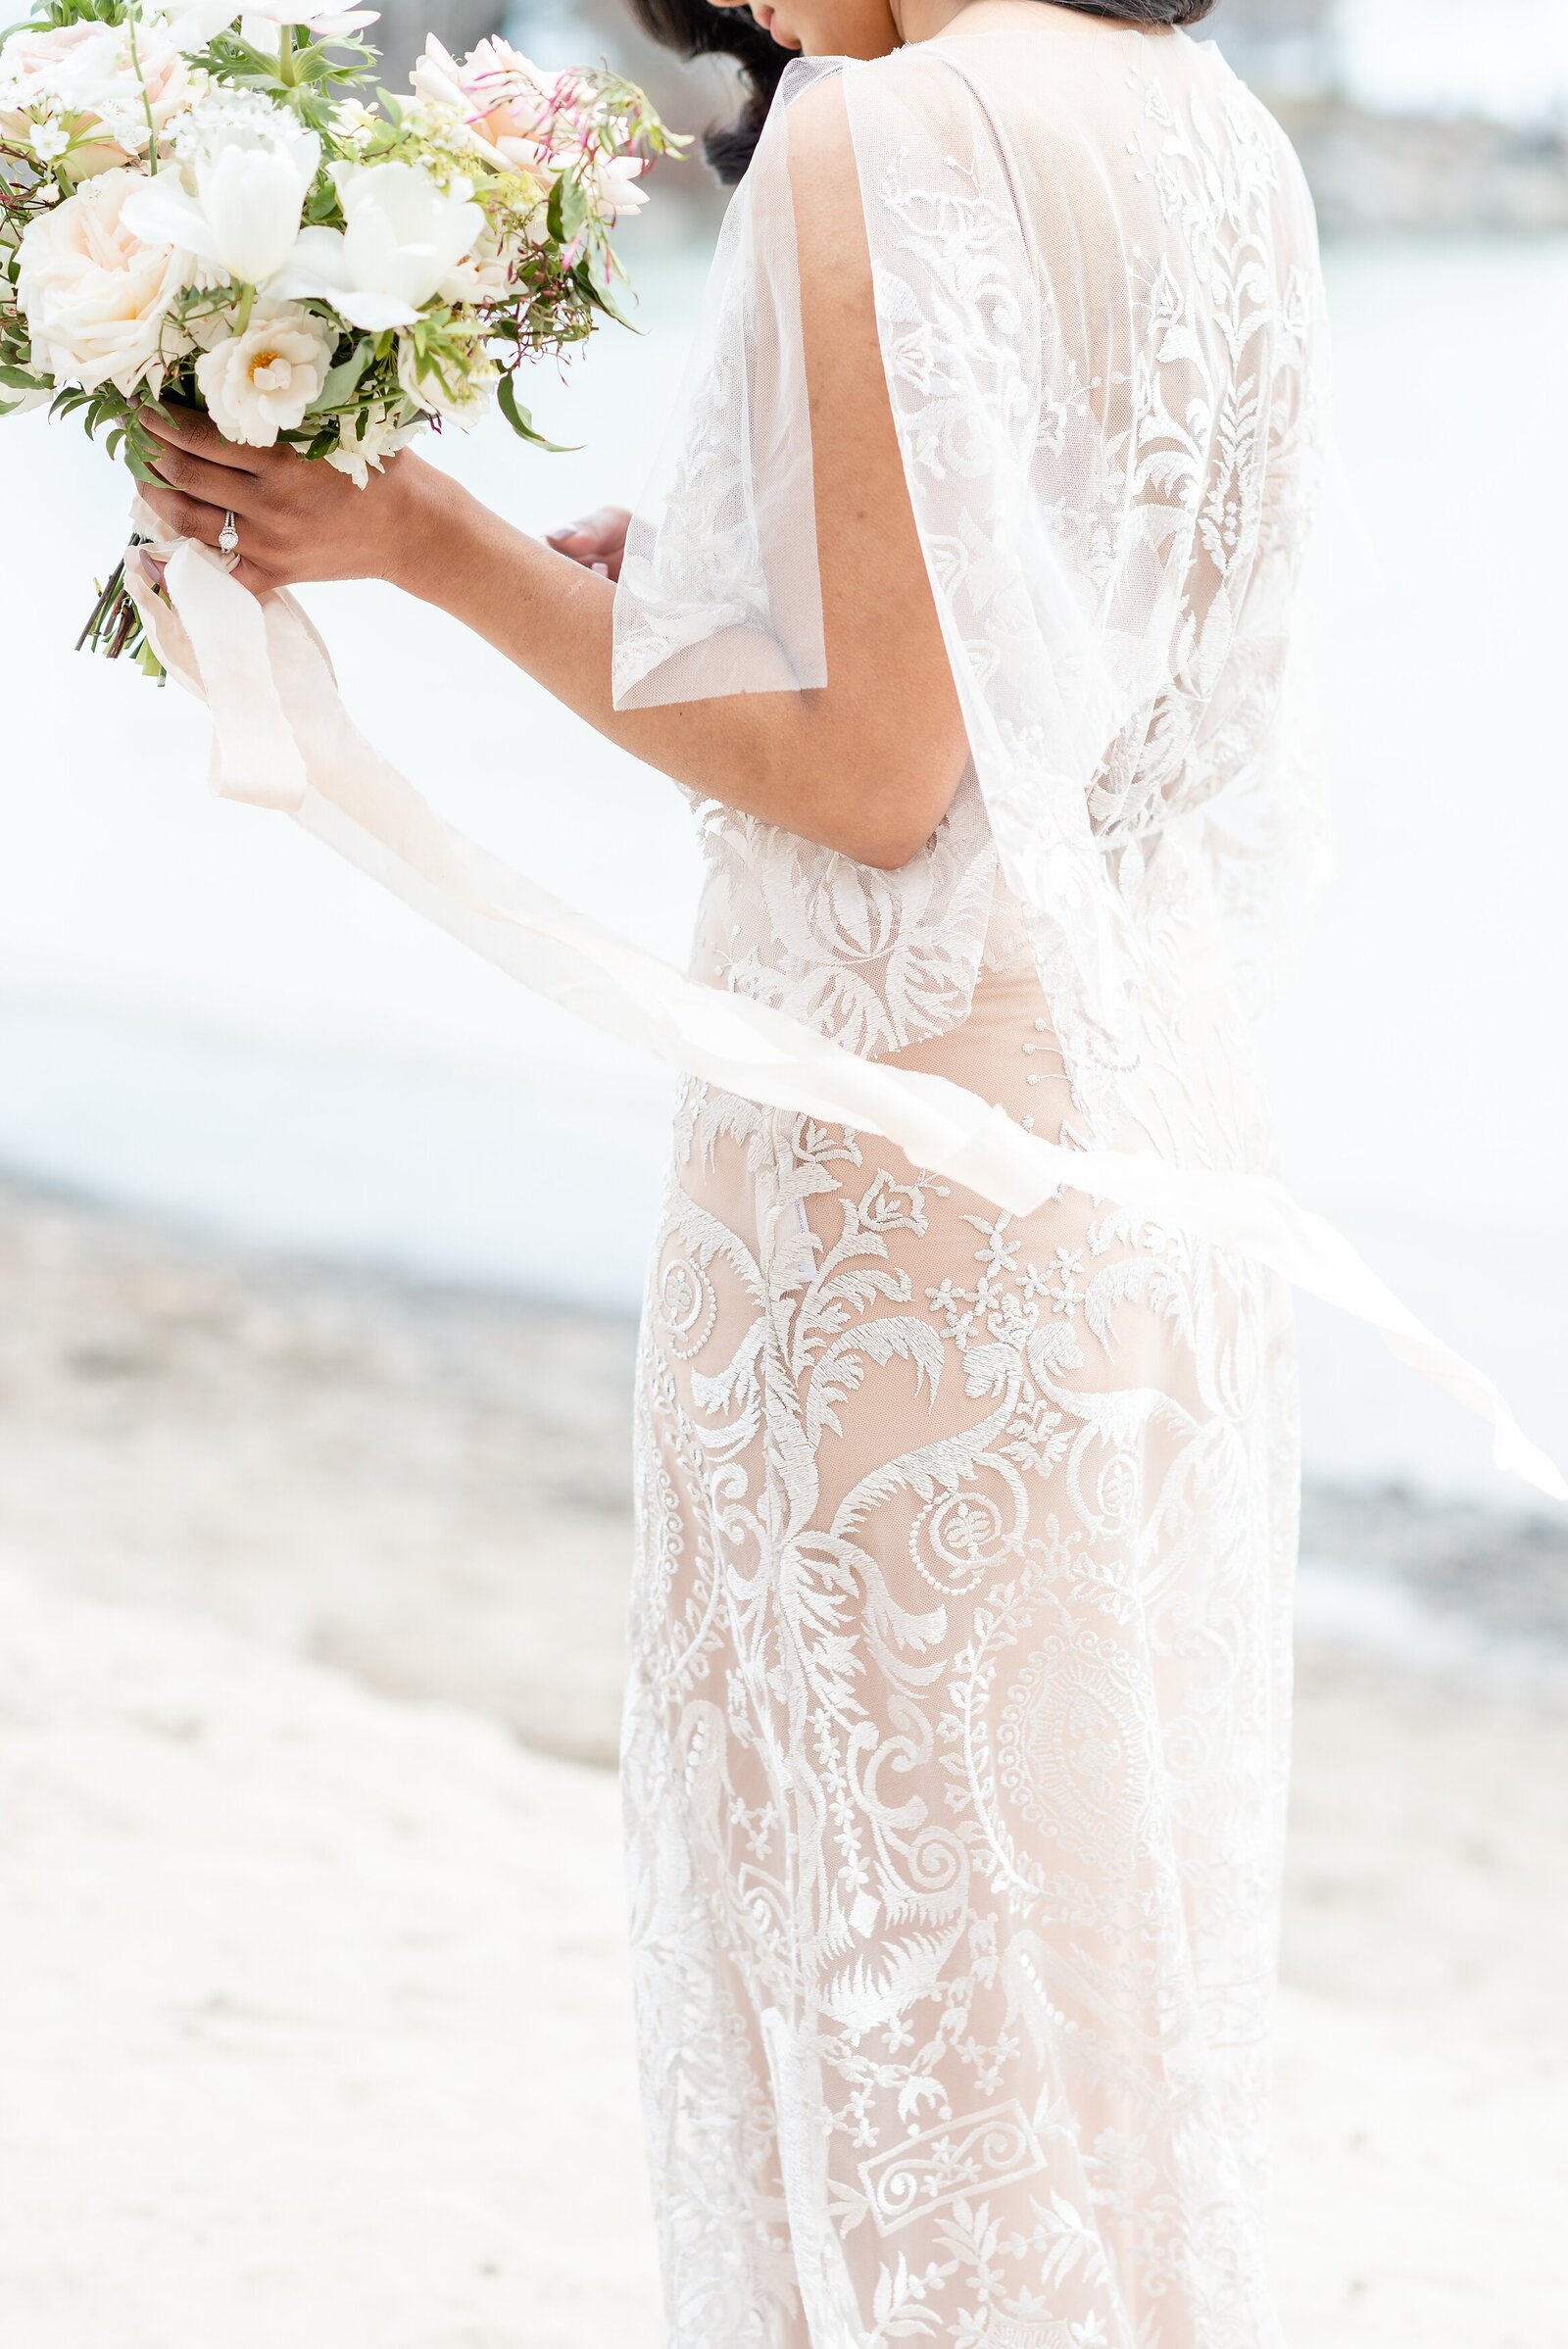 Bride-in-a-lace-wedding-dress-walking-along-the-beach-with-her-bouquet